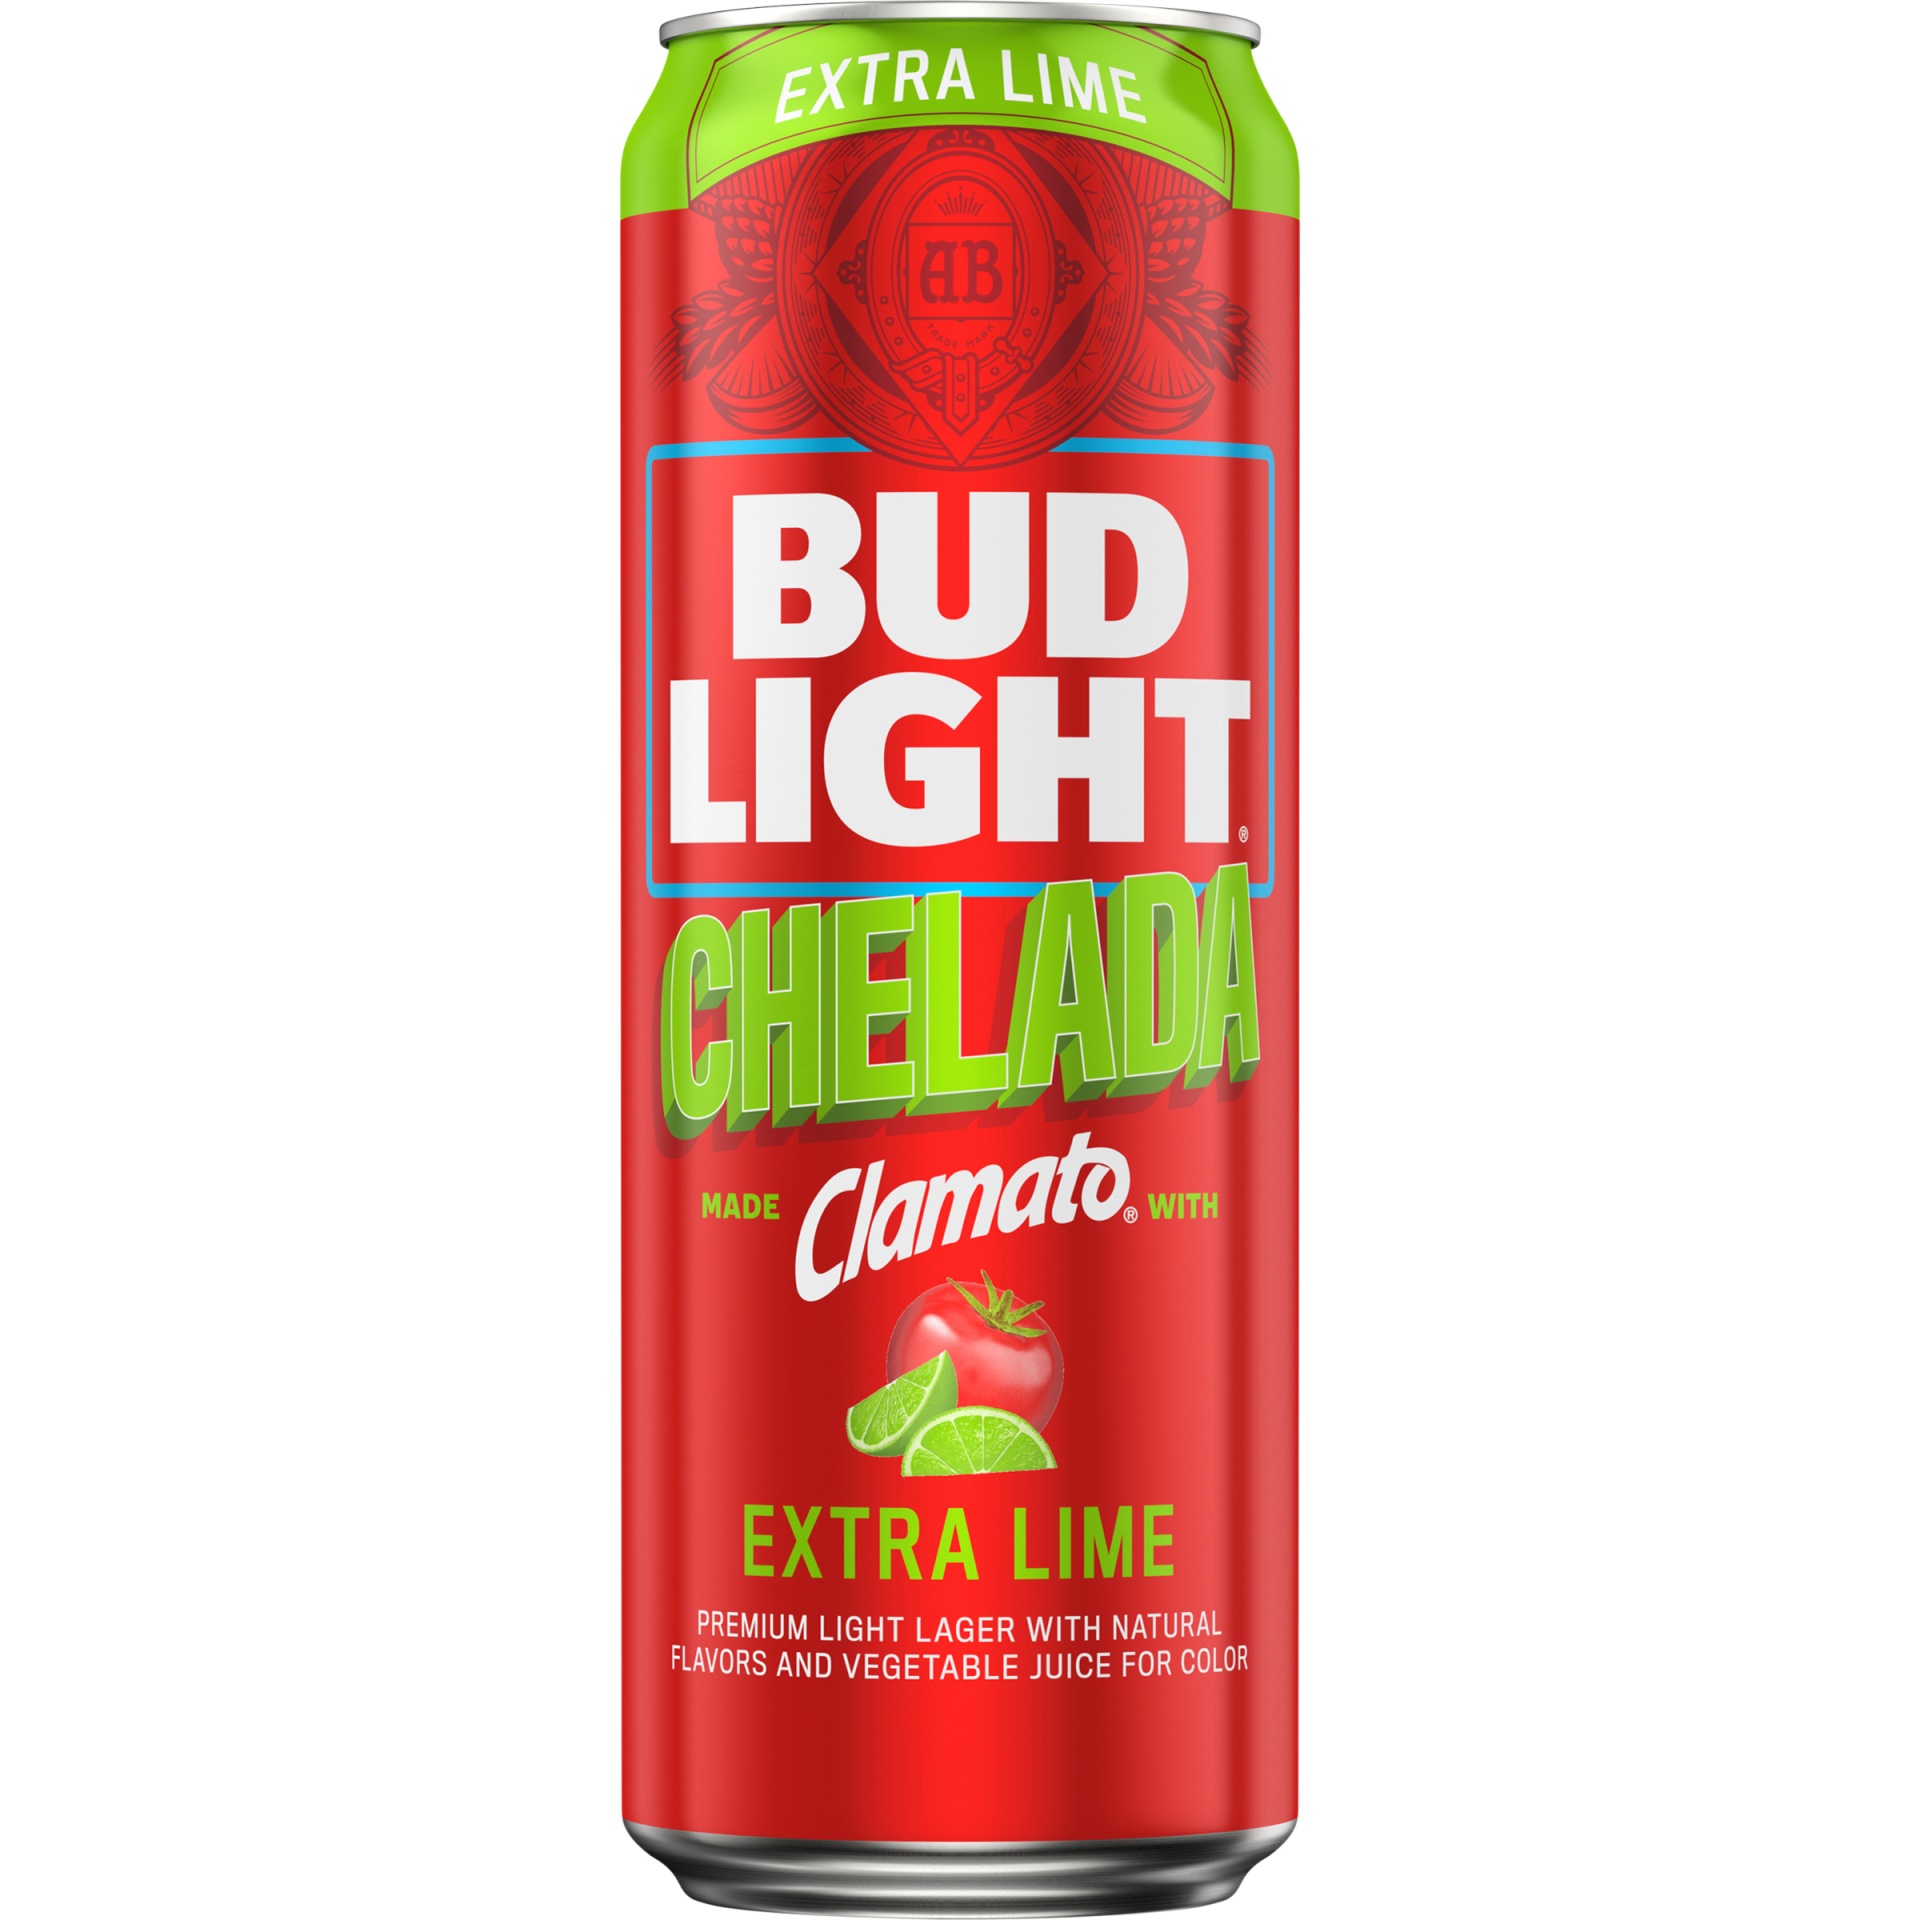 slide 1 of 2, Bud Light Chelada Extra Lime Made with Clamato Beer, 4.2% ABV, 25 oz